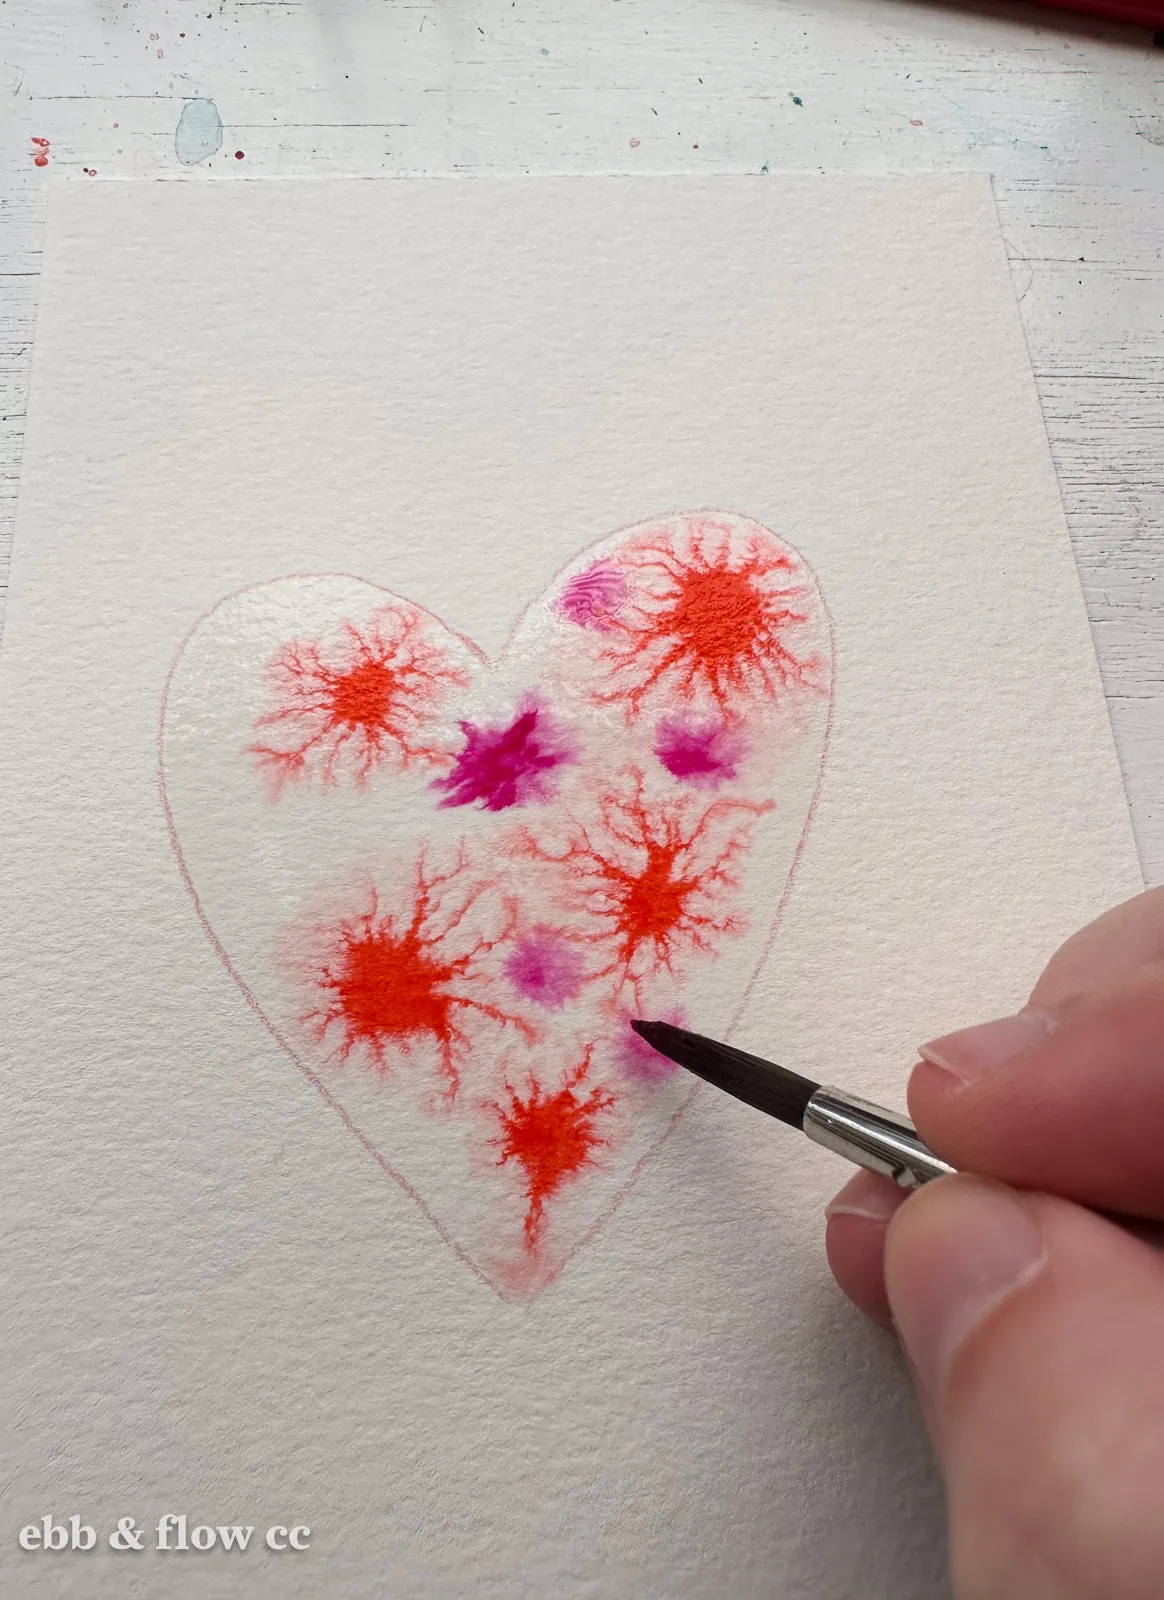 paint colors added to water heart shape on paper